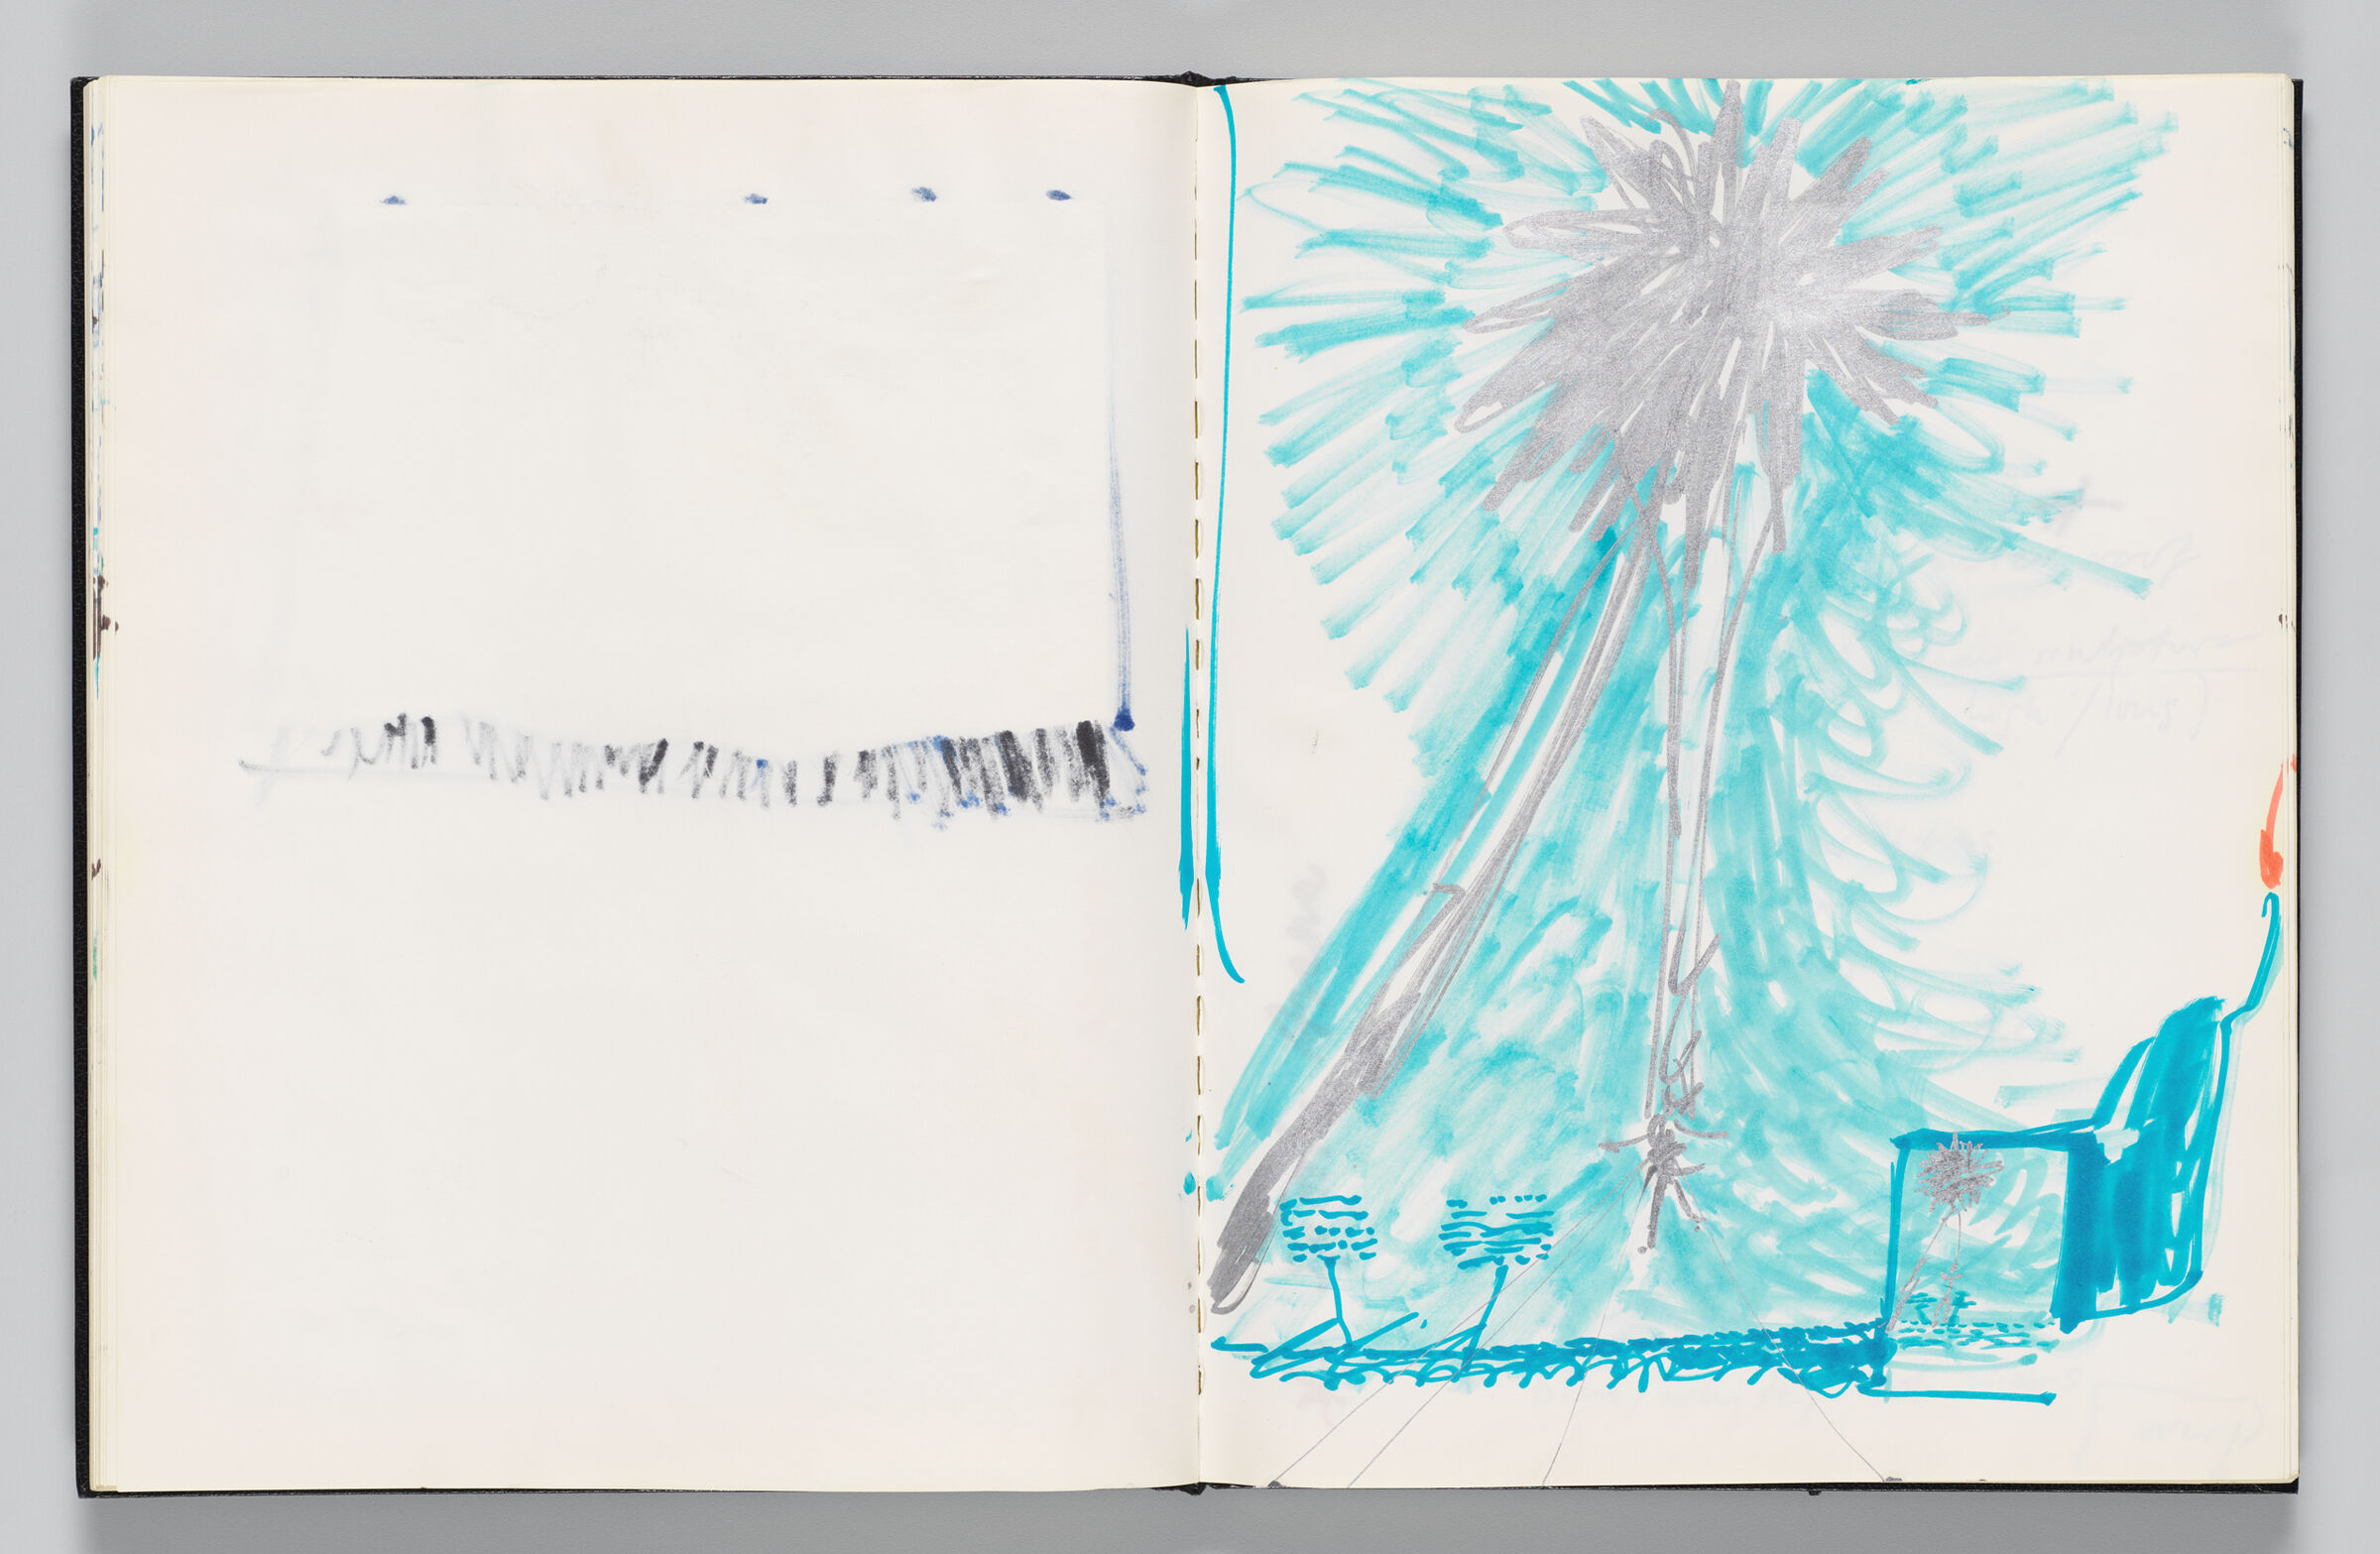 Untitled (Bleed-Through Of Previous Page, Left Page); Untitled (Inflatables Attached To Figures, Right Page)